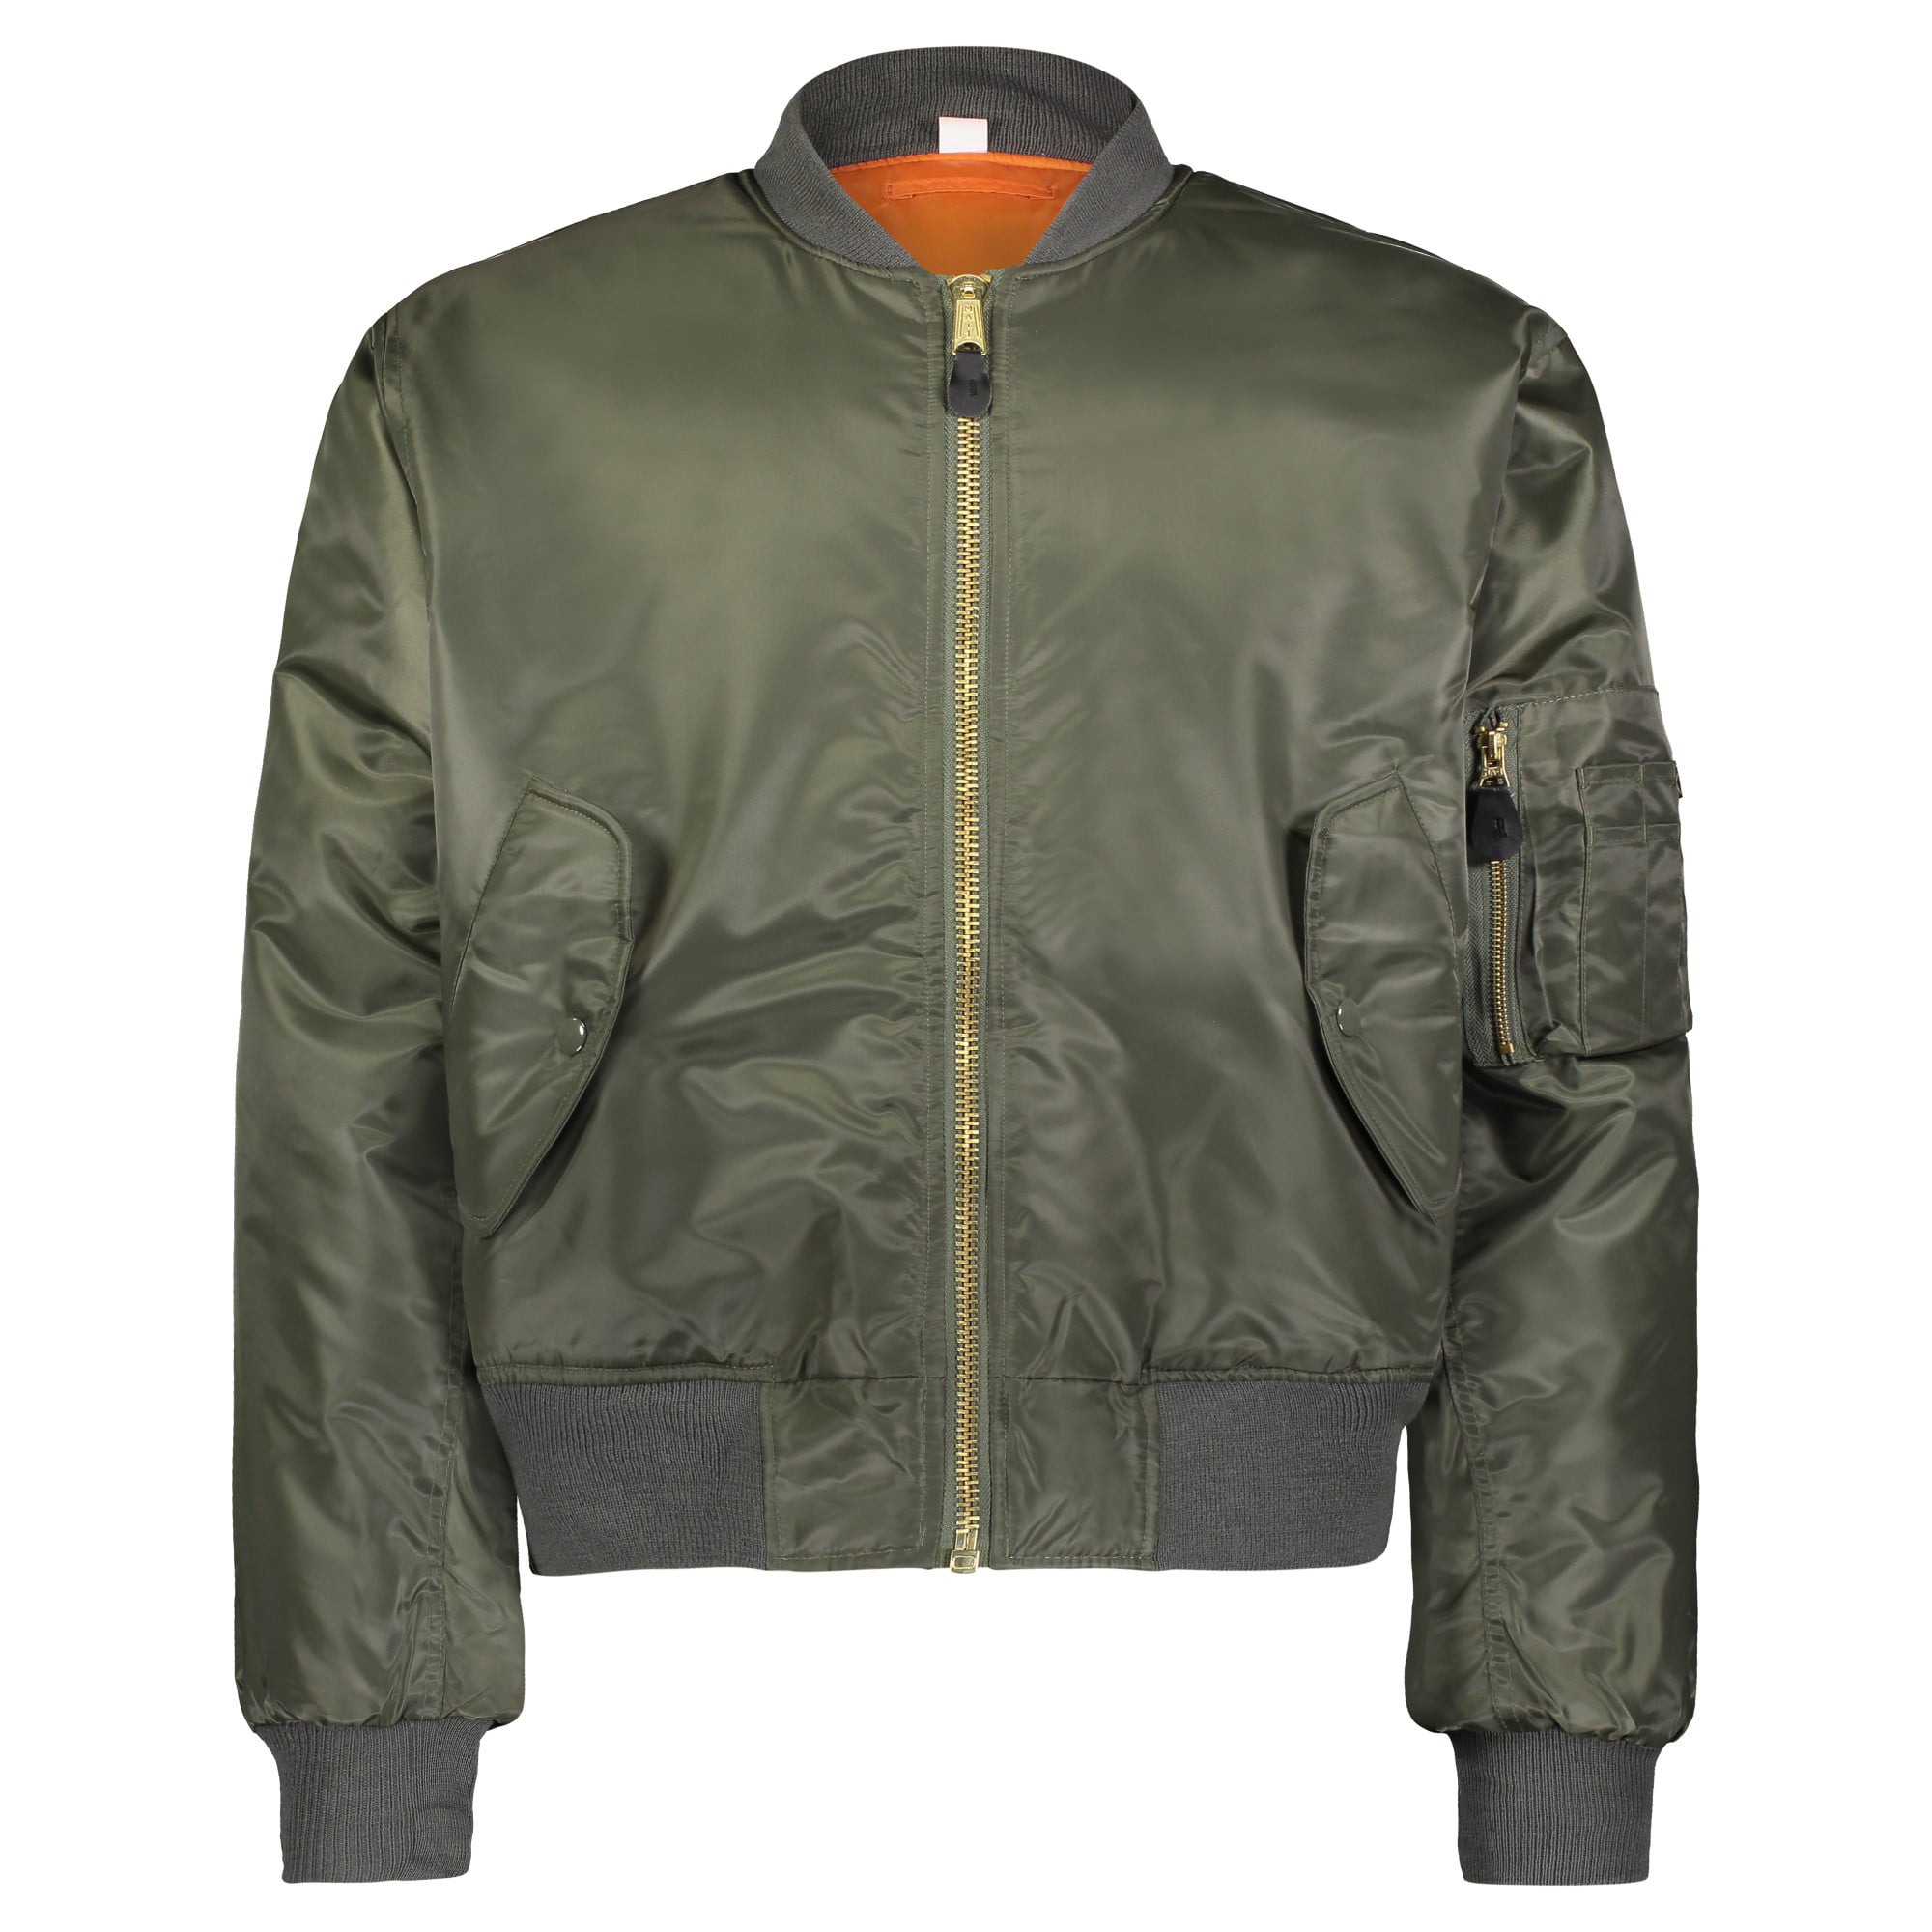 MA1 Mens Classic Bomber Jacket Military Air Force Style Padded Biker Jacket S 5x 